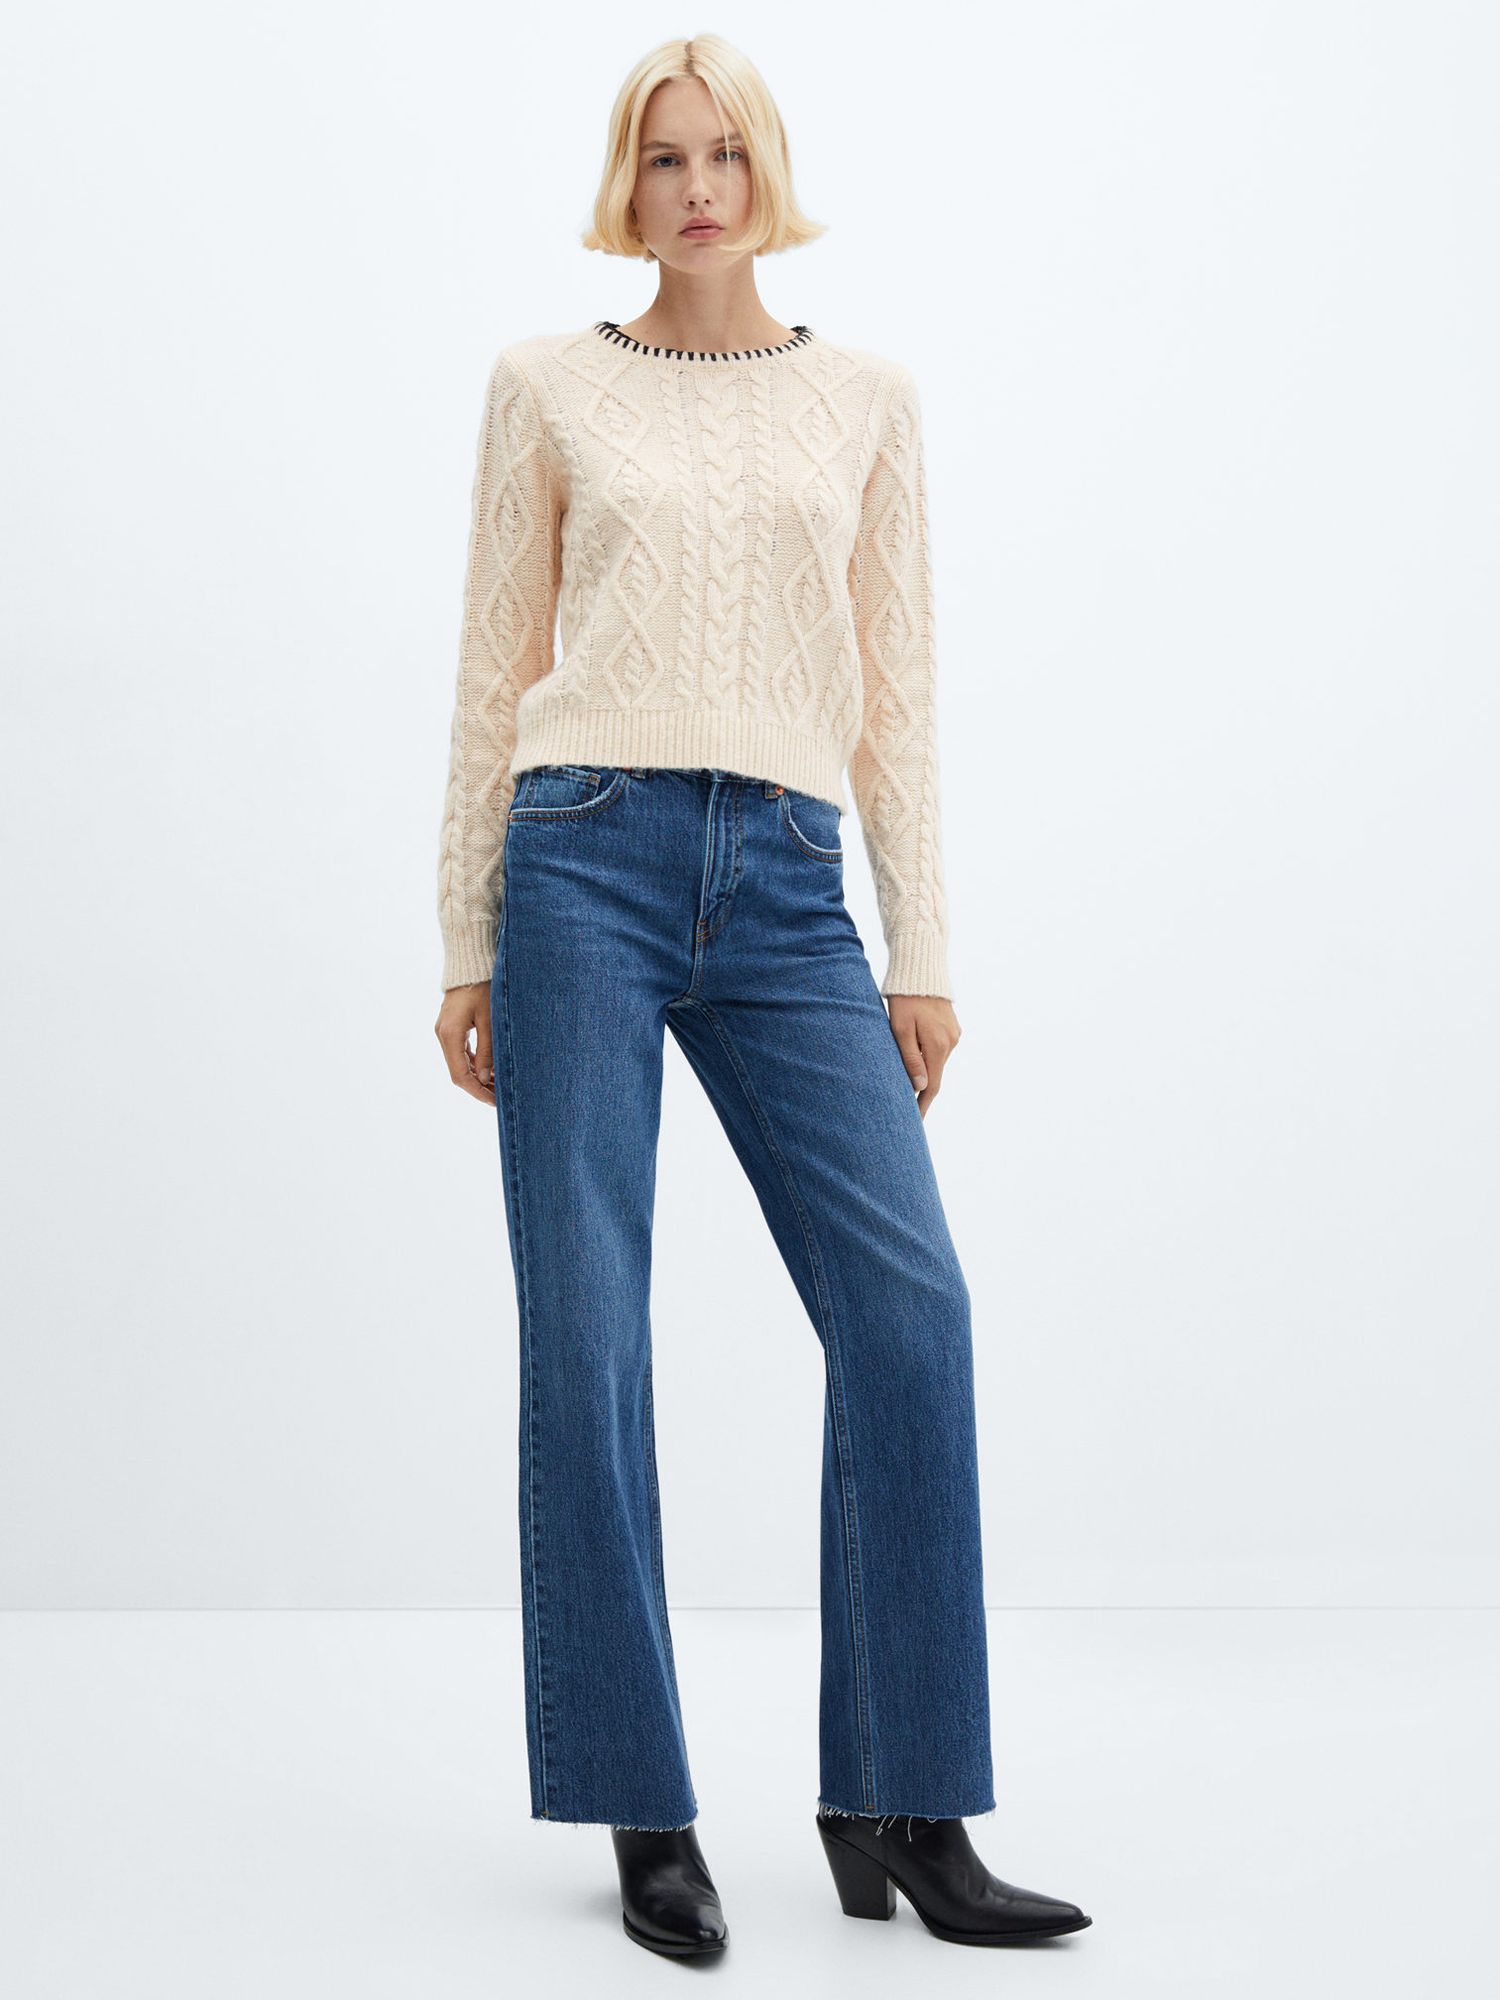 Mango Frizzly Wool Blend Cable Knit Jumper, Light Beige